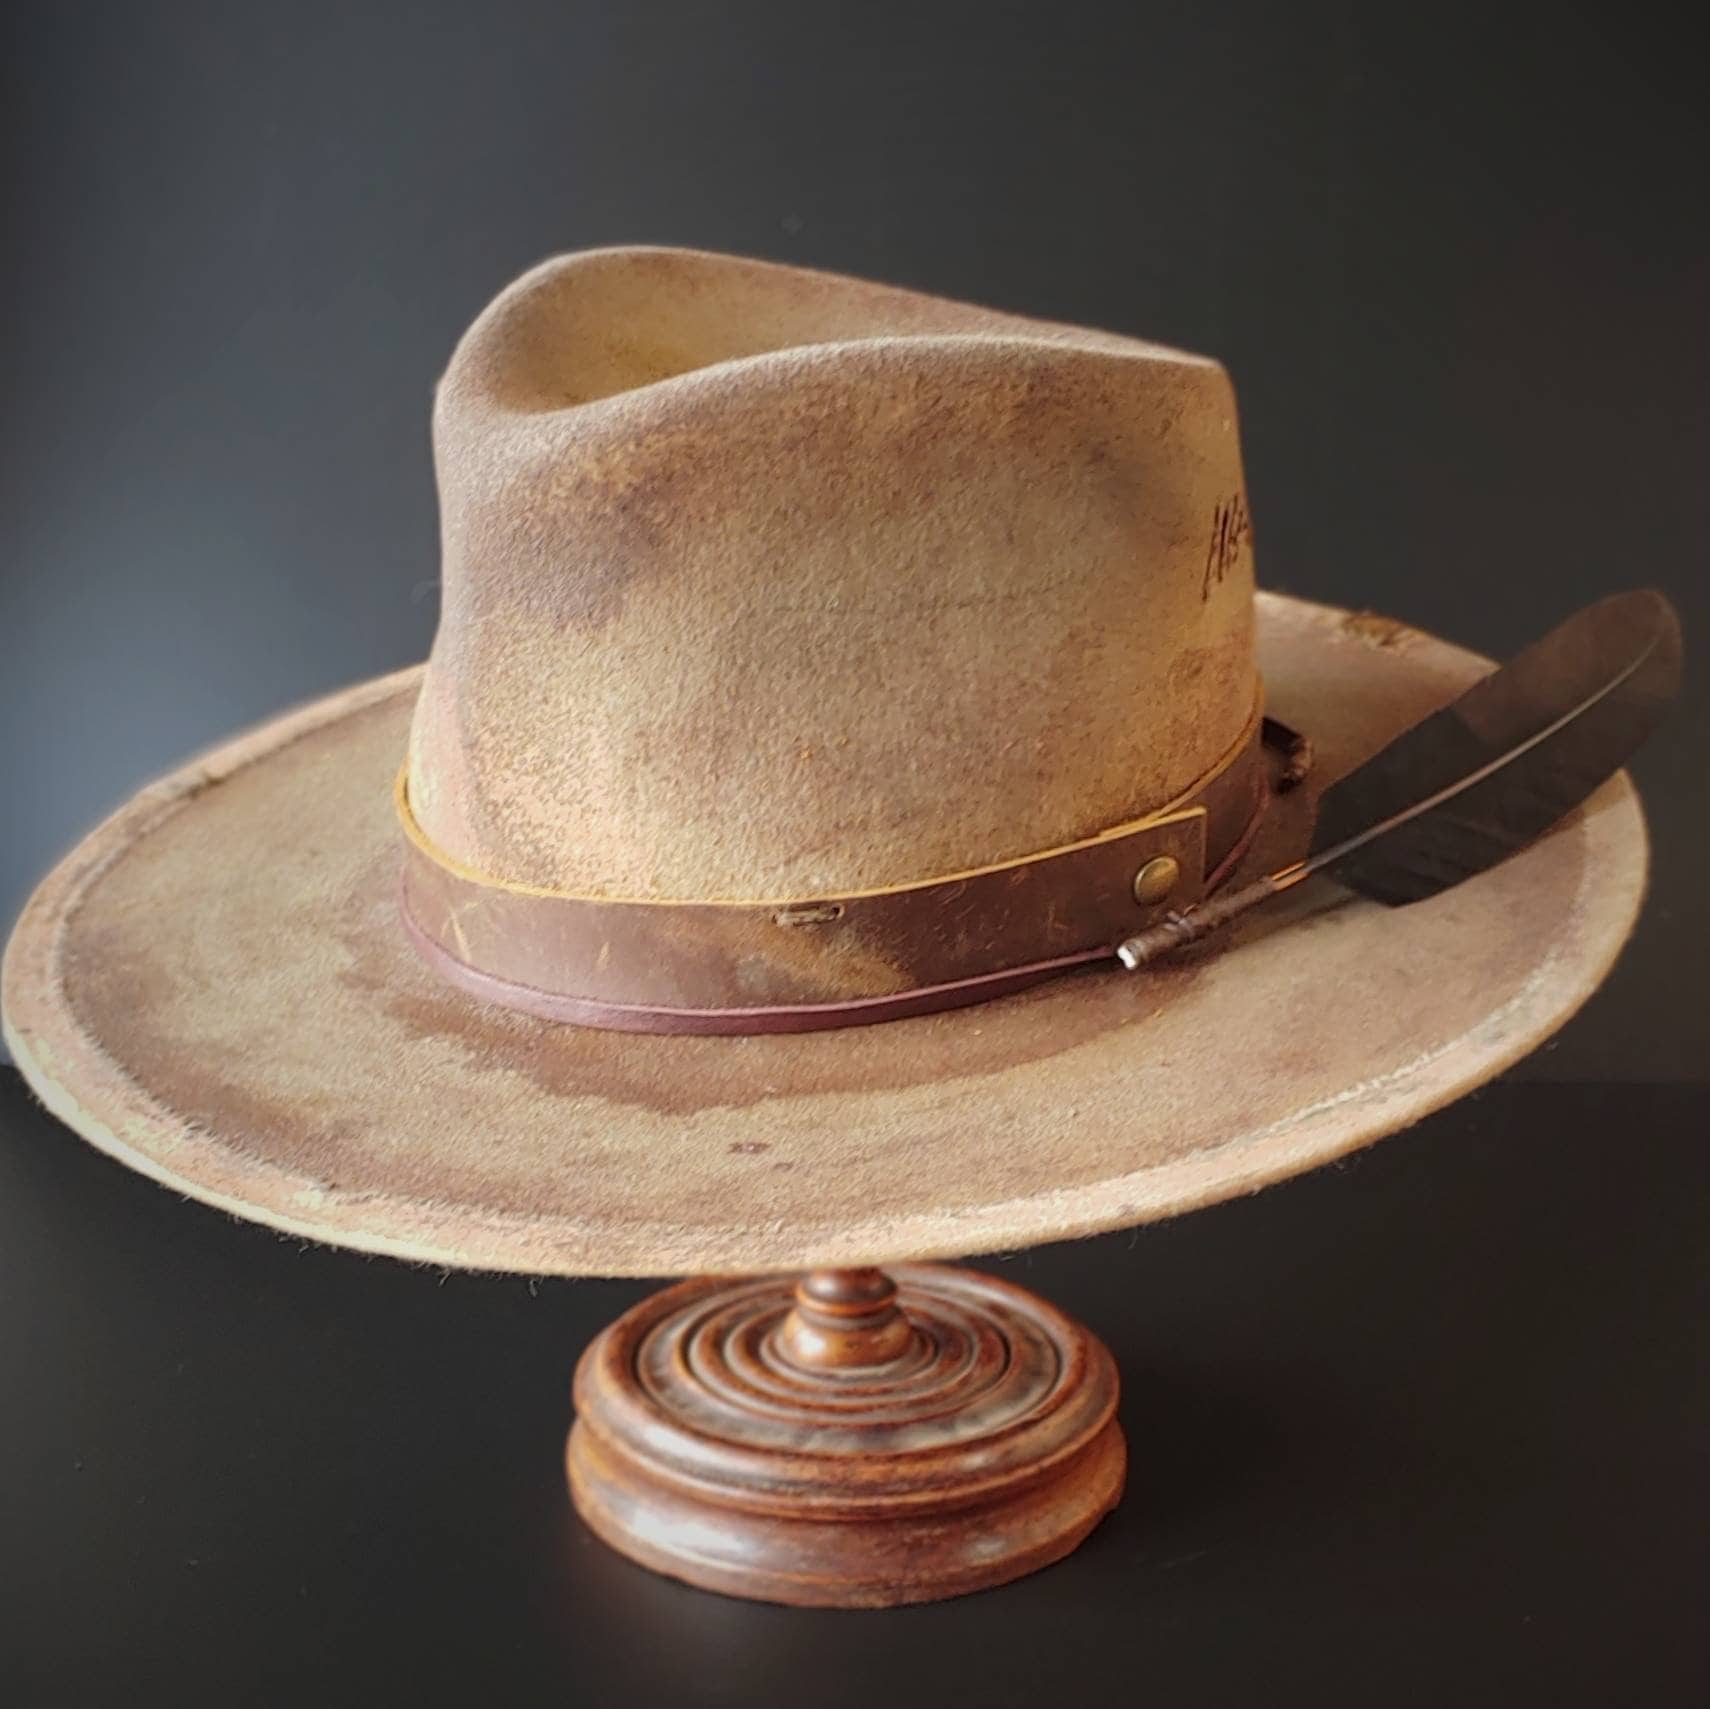 Cowboy hat size 6 7/8. The Dirty Little Liar from Ugly Outlaw.